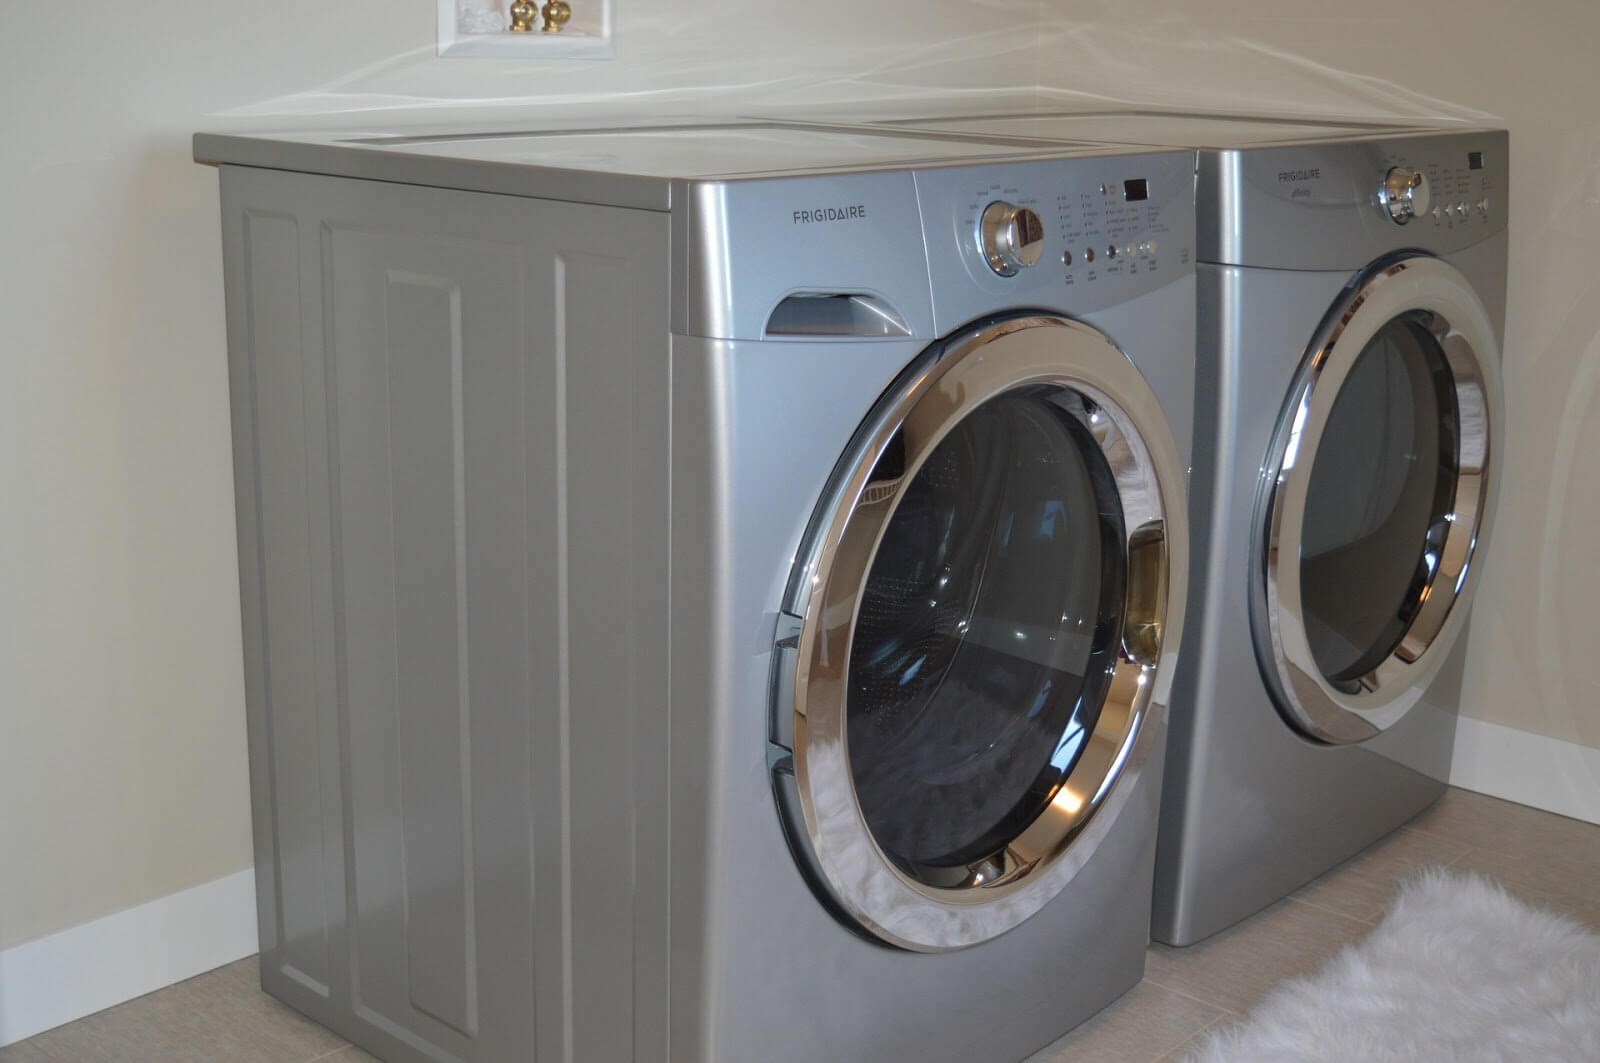 Redo Your Laundry Room with Tile